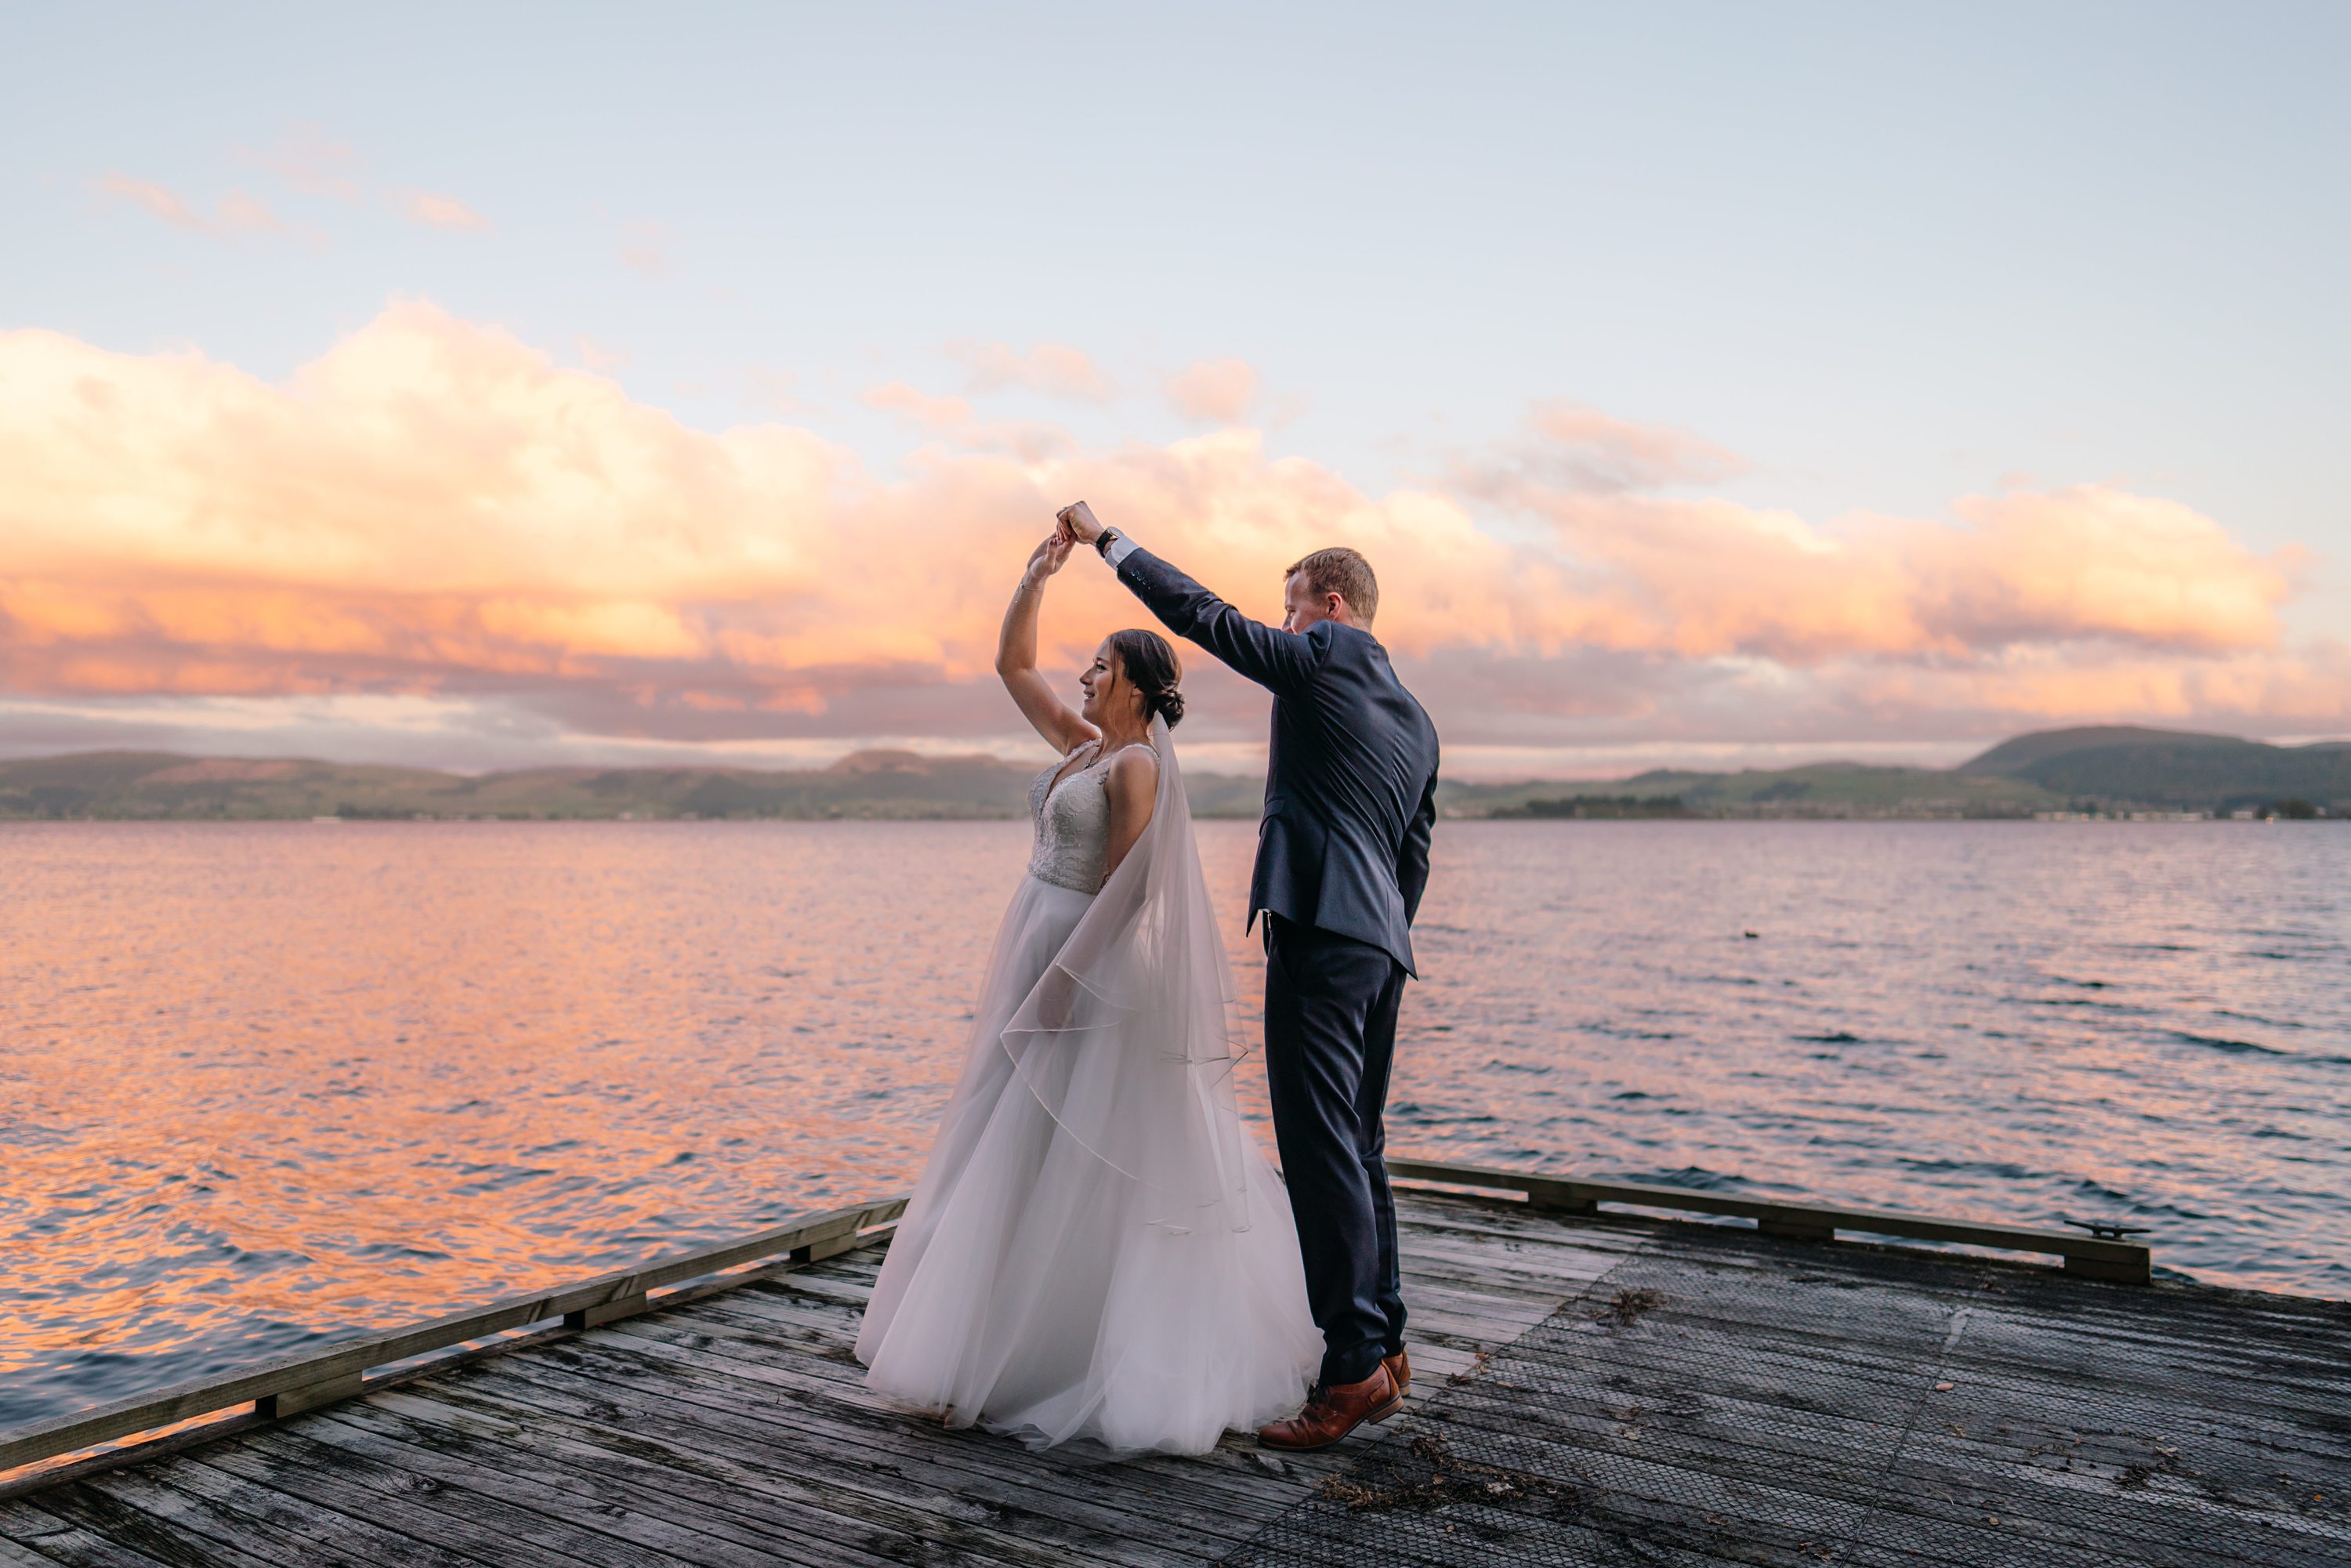 Peppers on the Point,Rotorua Wedding Photographer